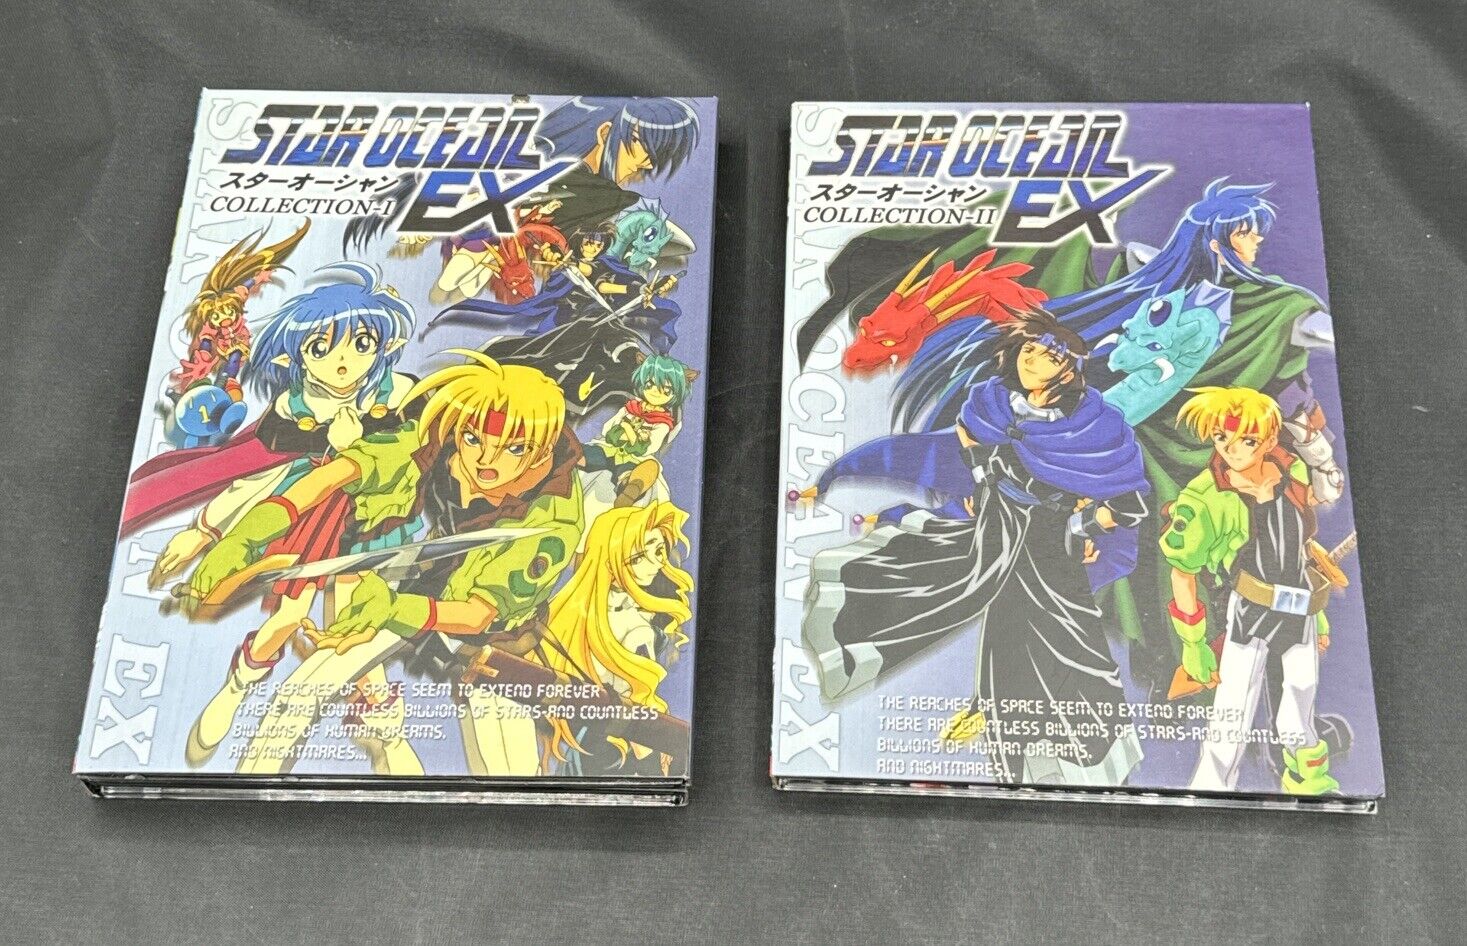 STAR OCEAN EX COLLECTION 1 AND 2 DVD SETS JAPANESE 